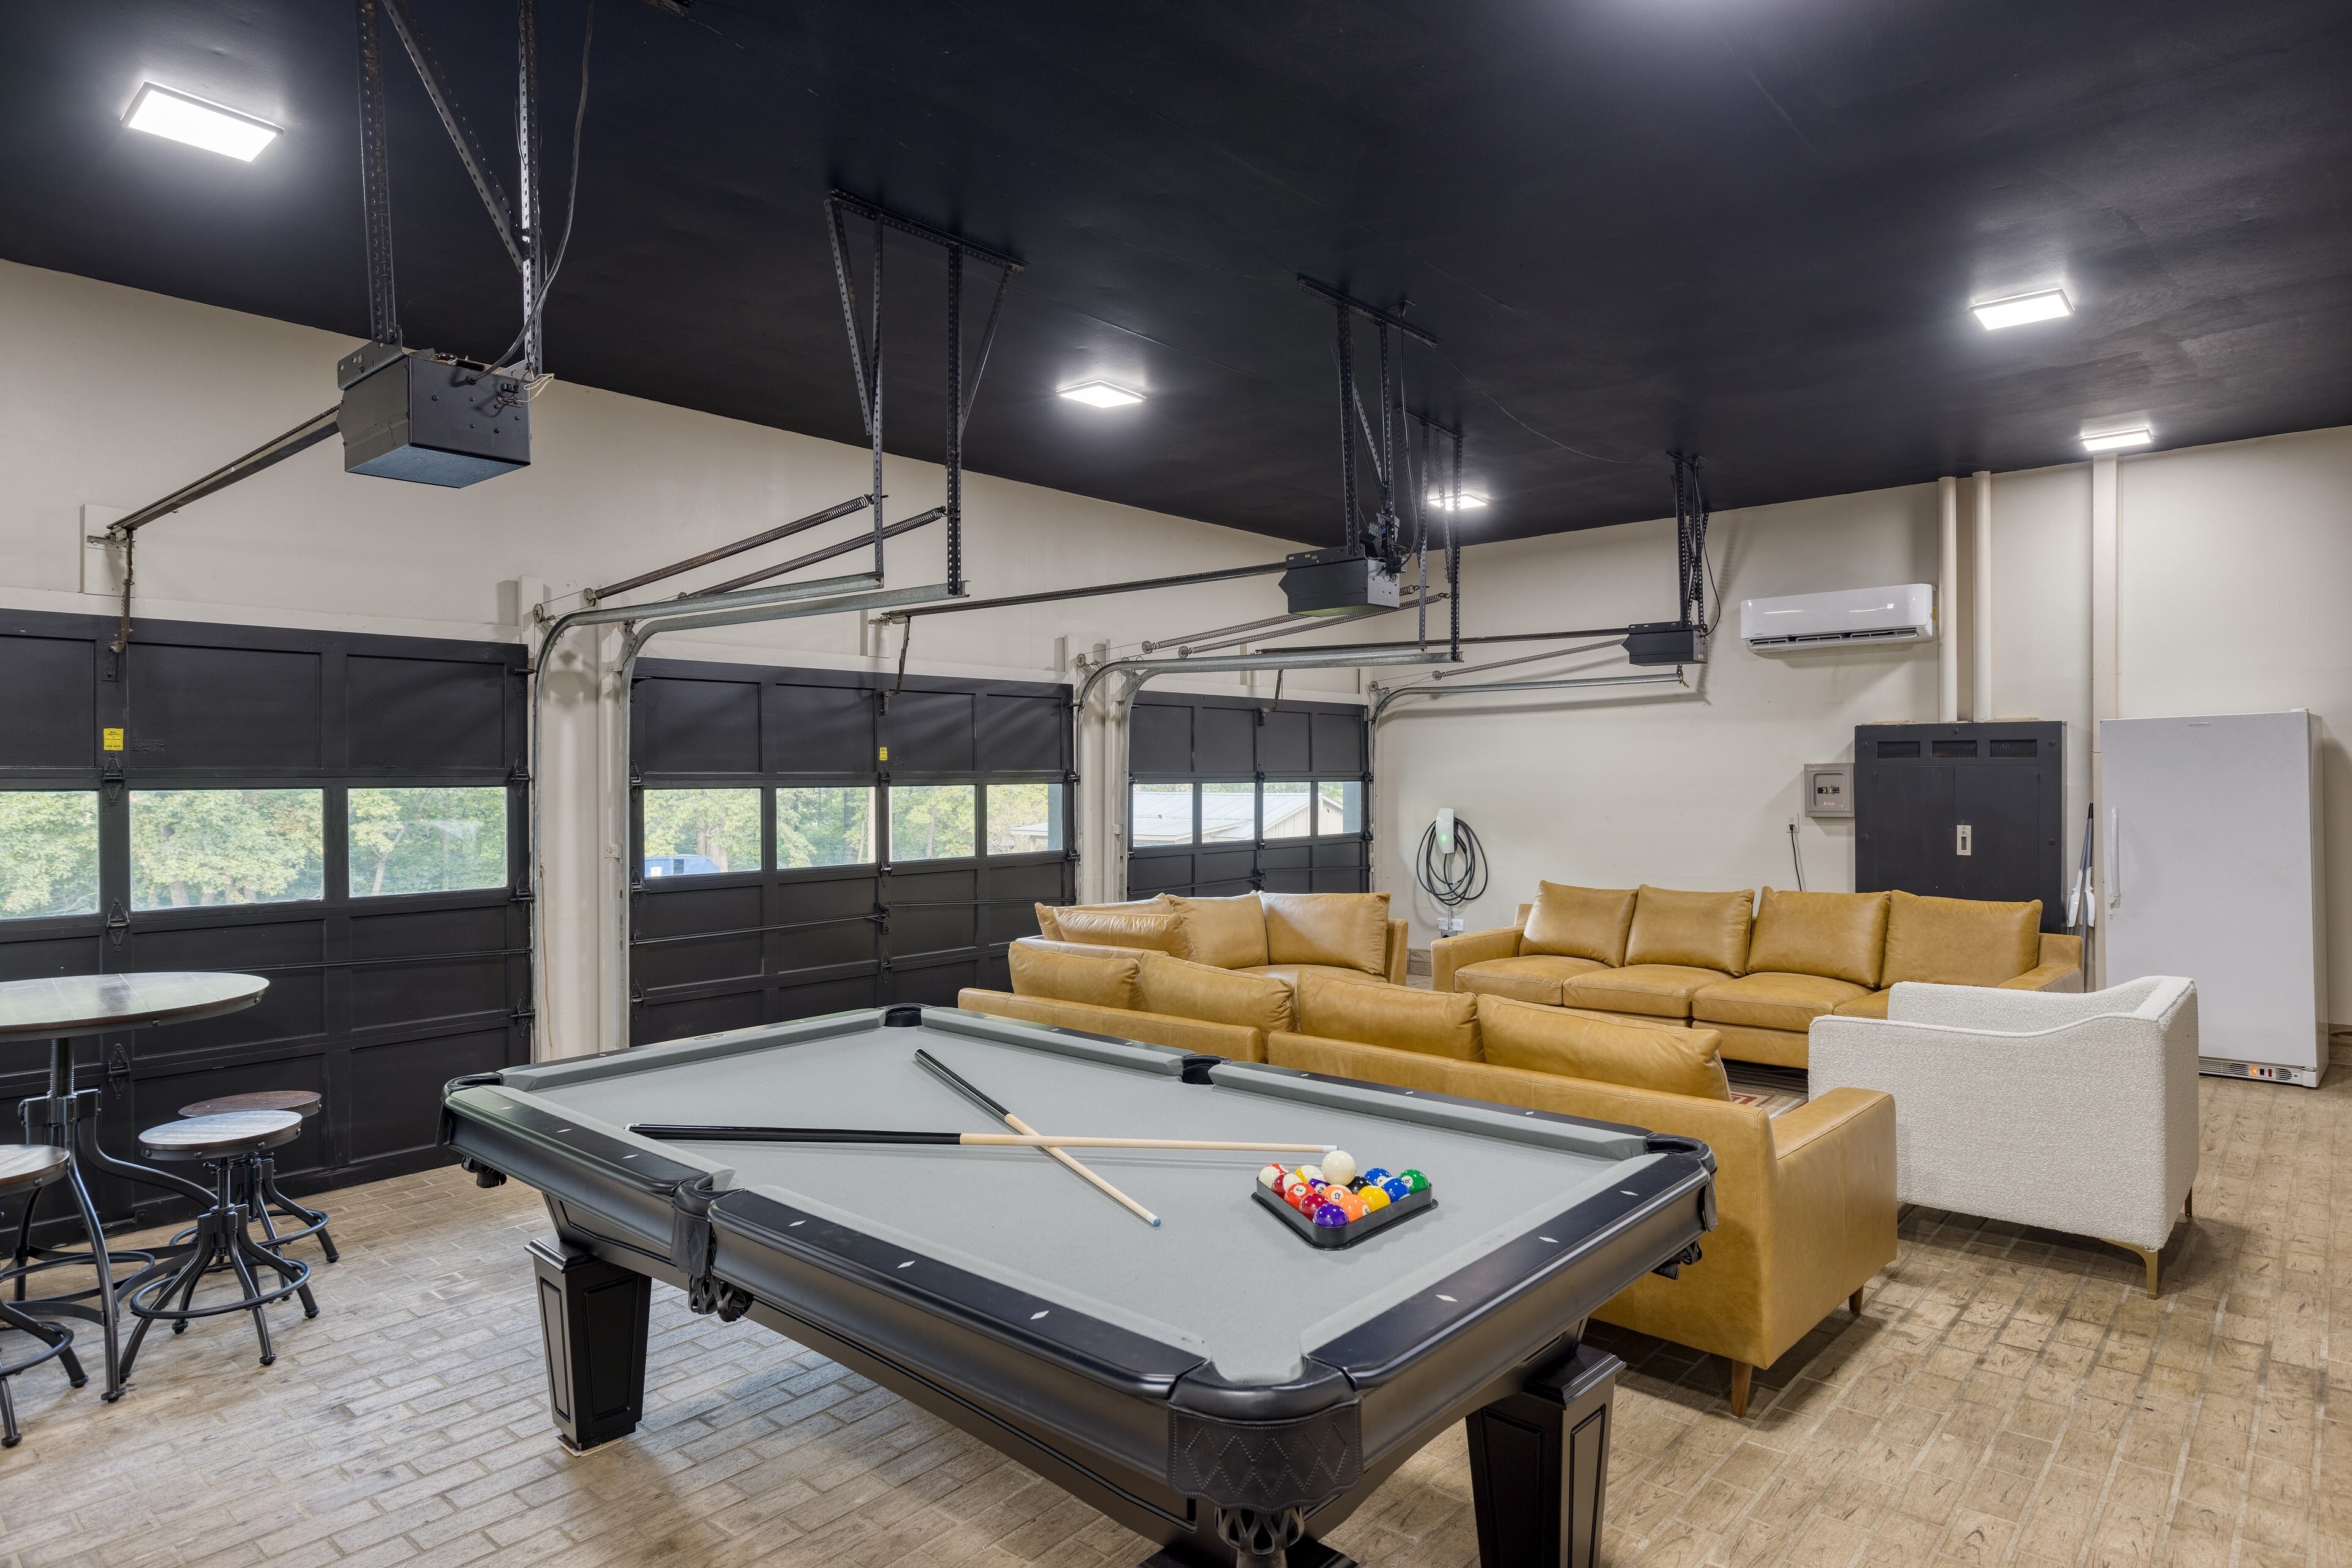 Main home's converted garage game room boasts an oversized sitting area, pool table, and shuffleboard table.